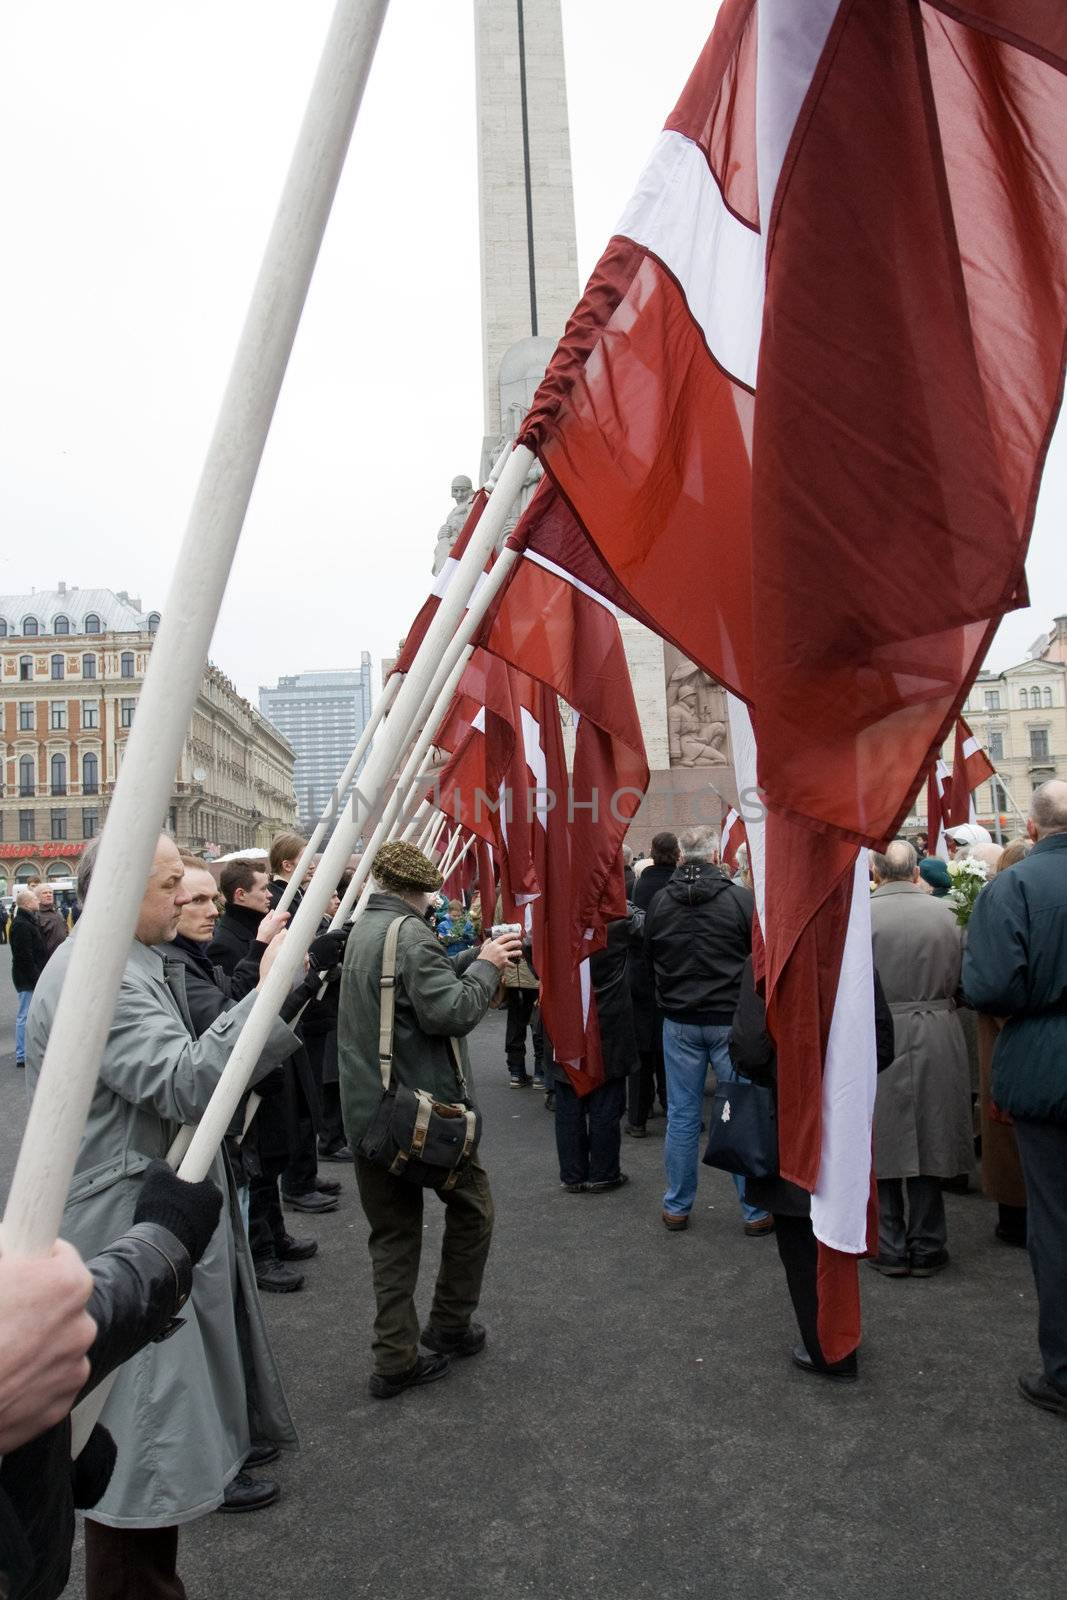 Riga, Latvia, March 16, 2009. Commemoration of the Latvian Waffen SS unit or Legionnaires.The event is always drawing crowds of nationalist supporters and anti-fascist demonstrators. Many Latvians legionnaires were forcibly called uo to join the Latvian SS Legion.